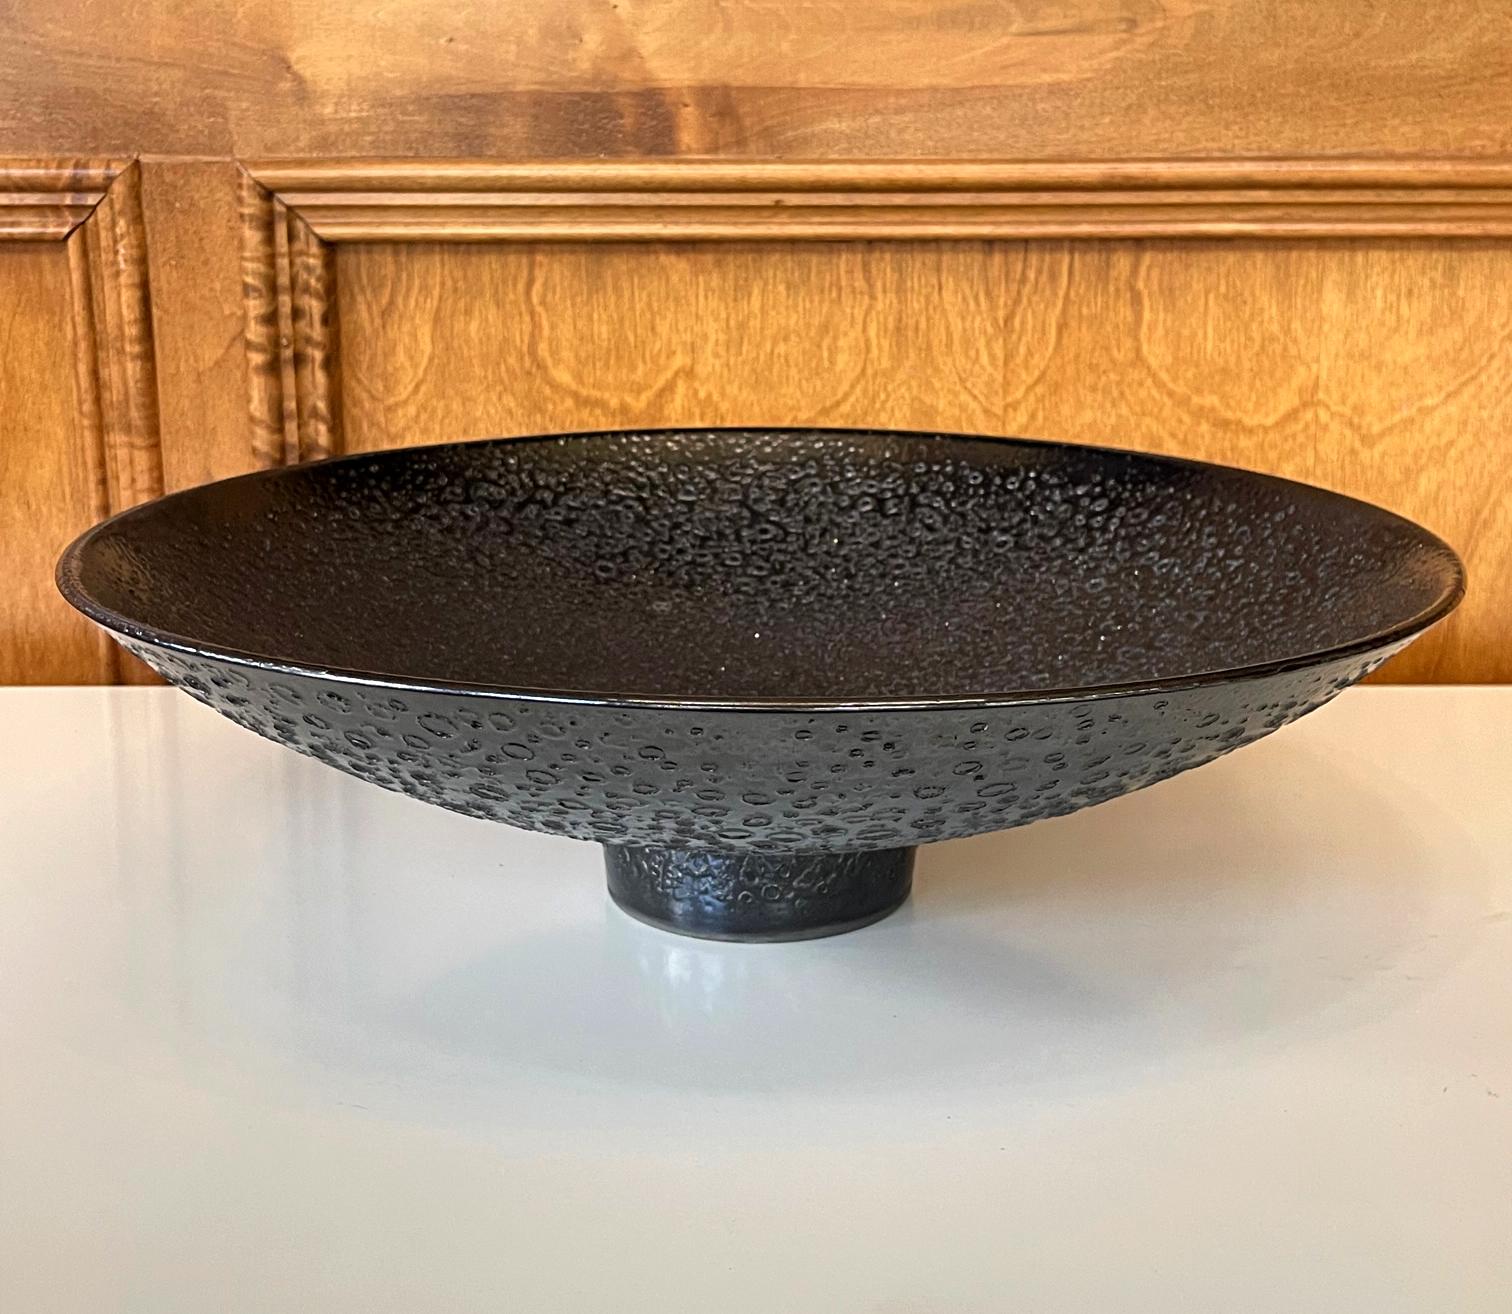 A centerpiece ceramic footed bowl of impressive size by California potter James Lovera (1920-2015), likely made in early 2000s. The bowl is covered completely in a black metallic lava glaze, which the artist was most famously known. The glaze is